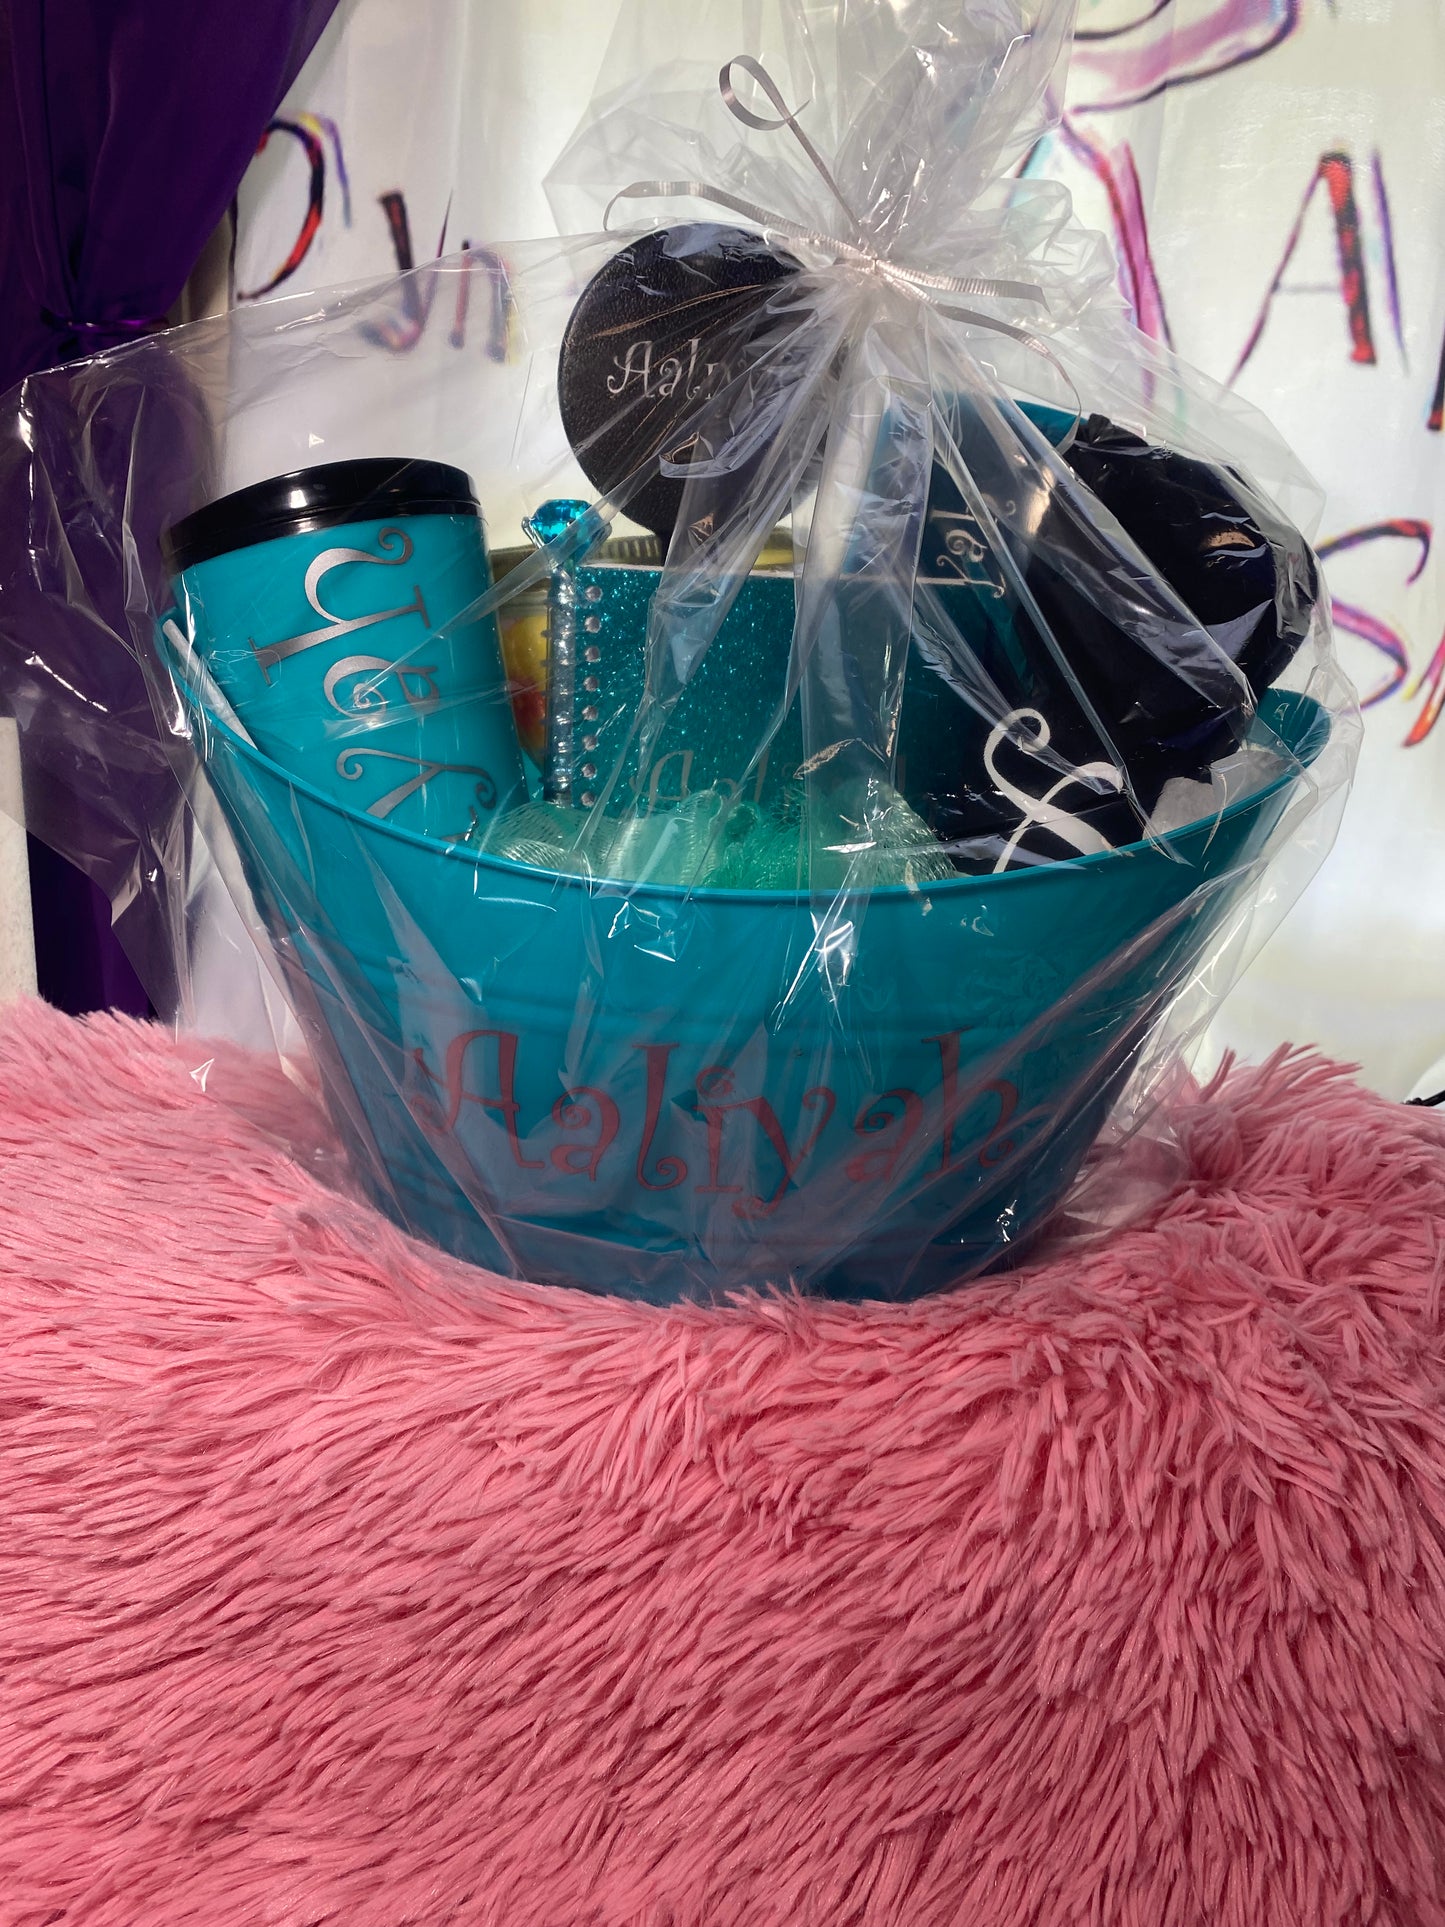 Gift Baskets For any Occasion